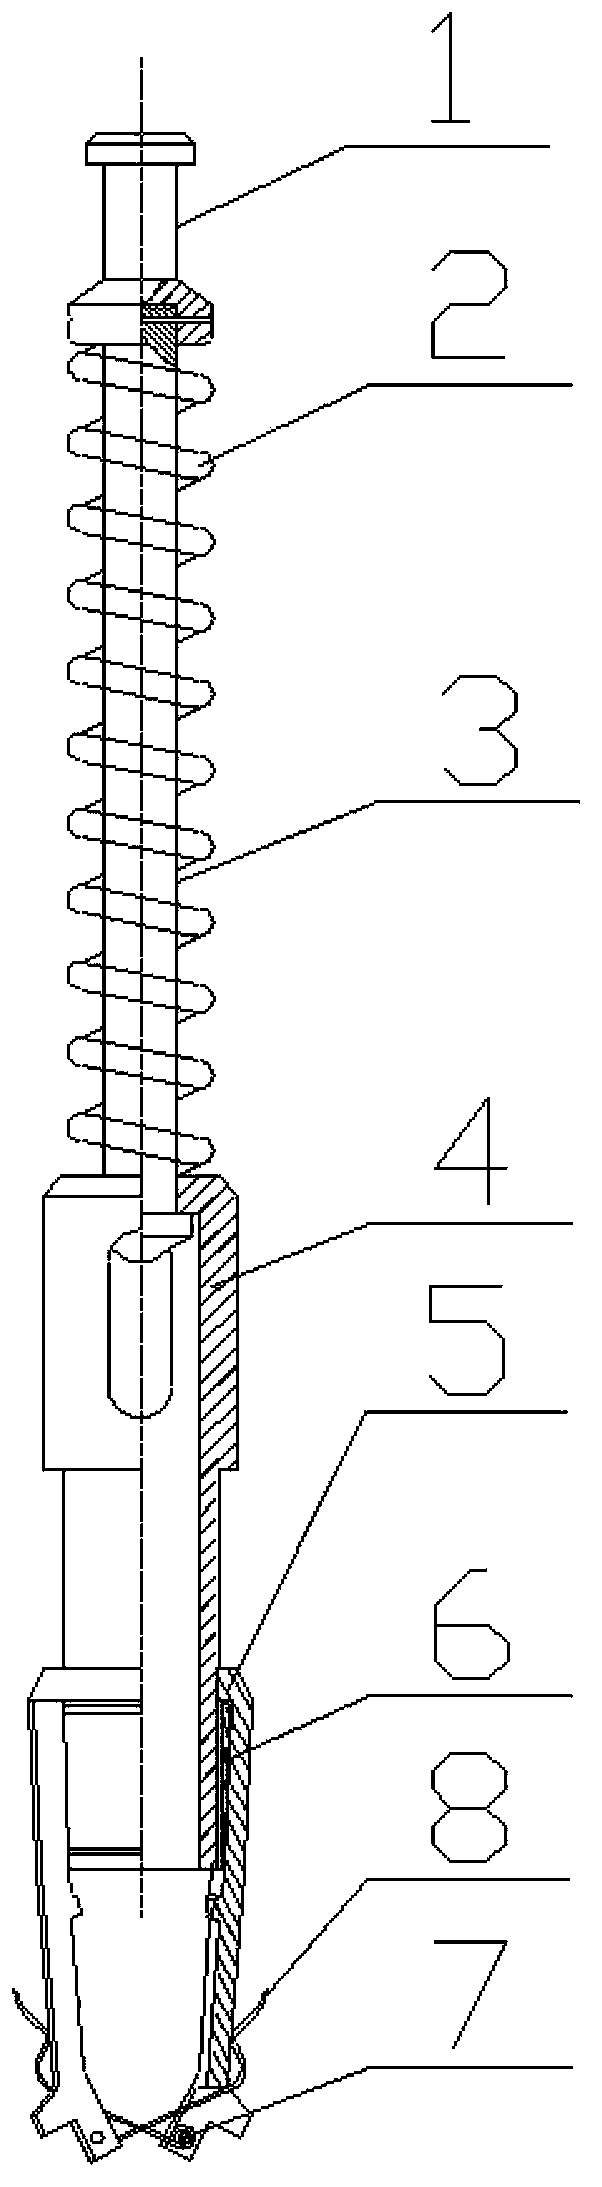 Split plunger device for non-shut-in continuous production